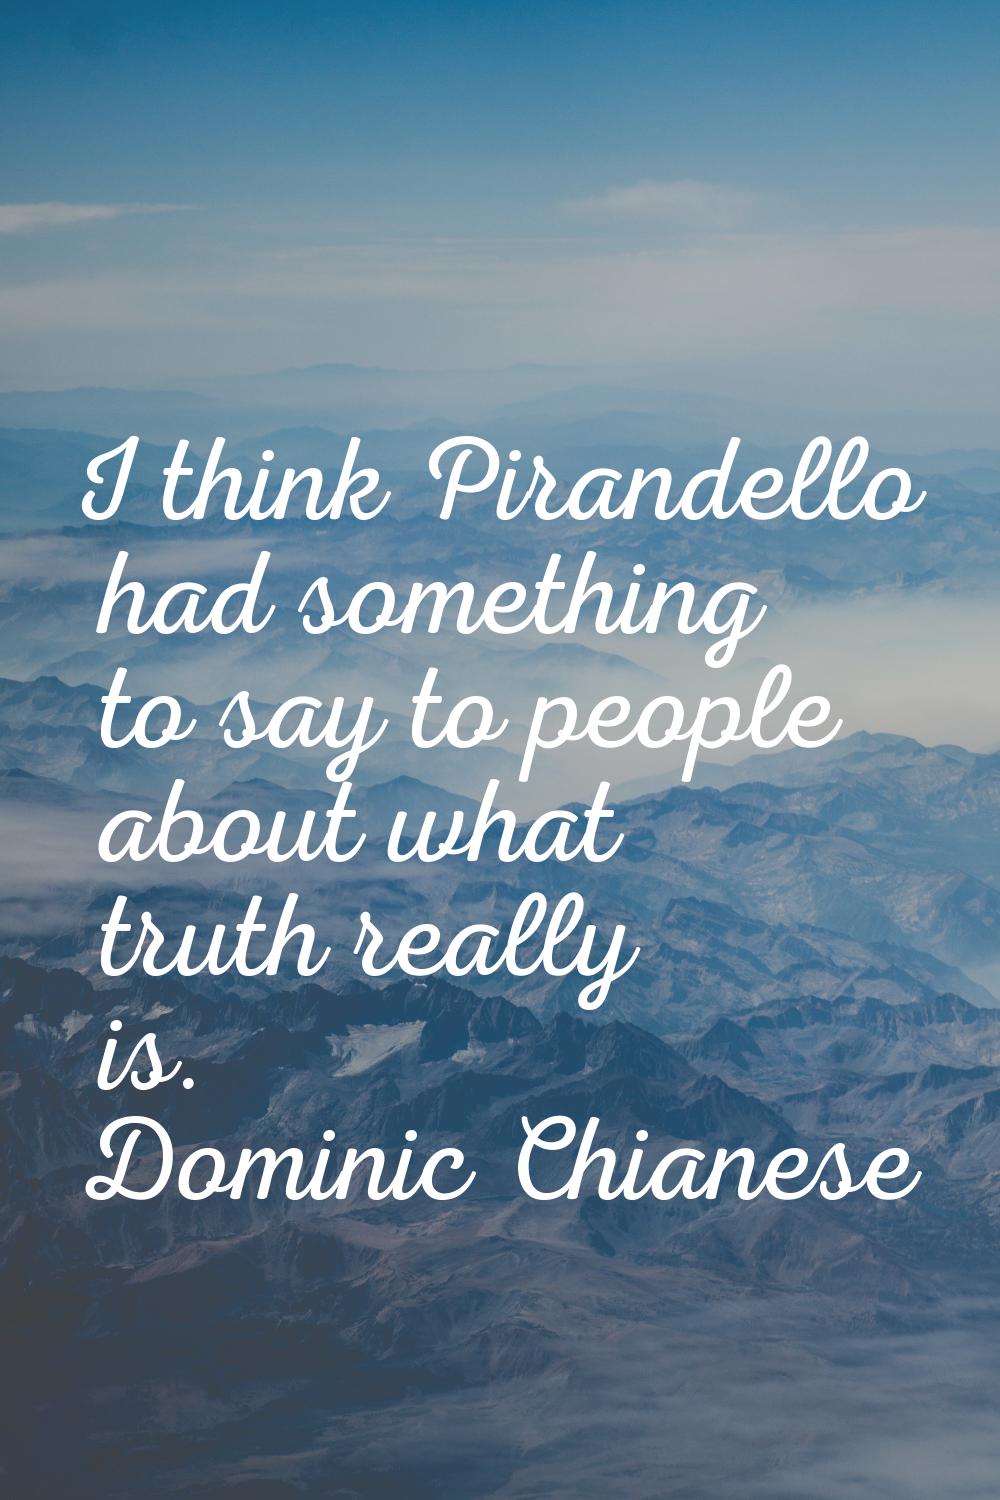 I think Pirandello had something to say to people about what truth really is.